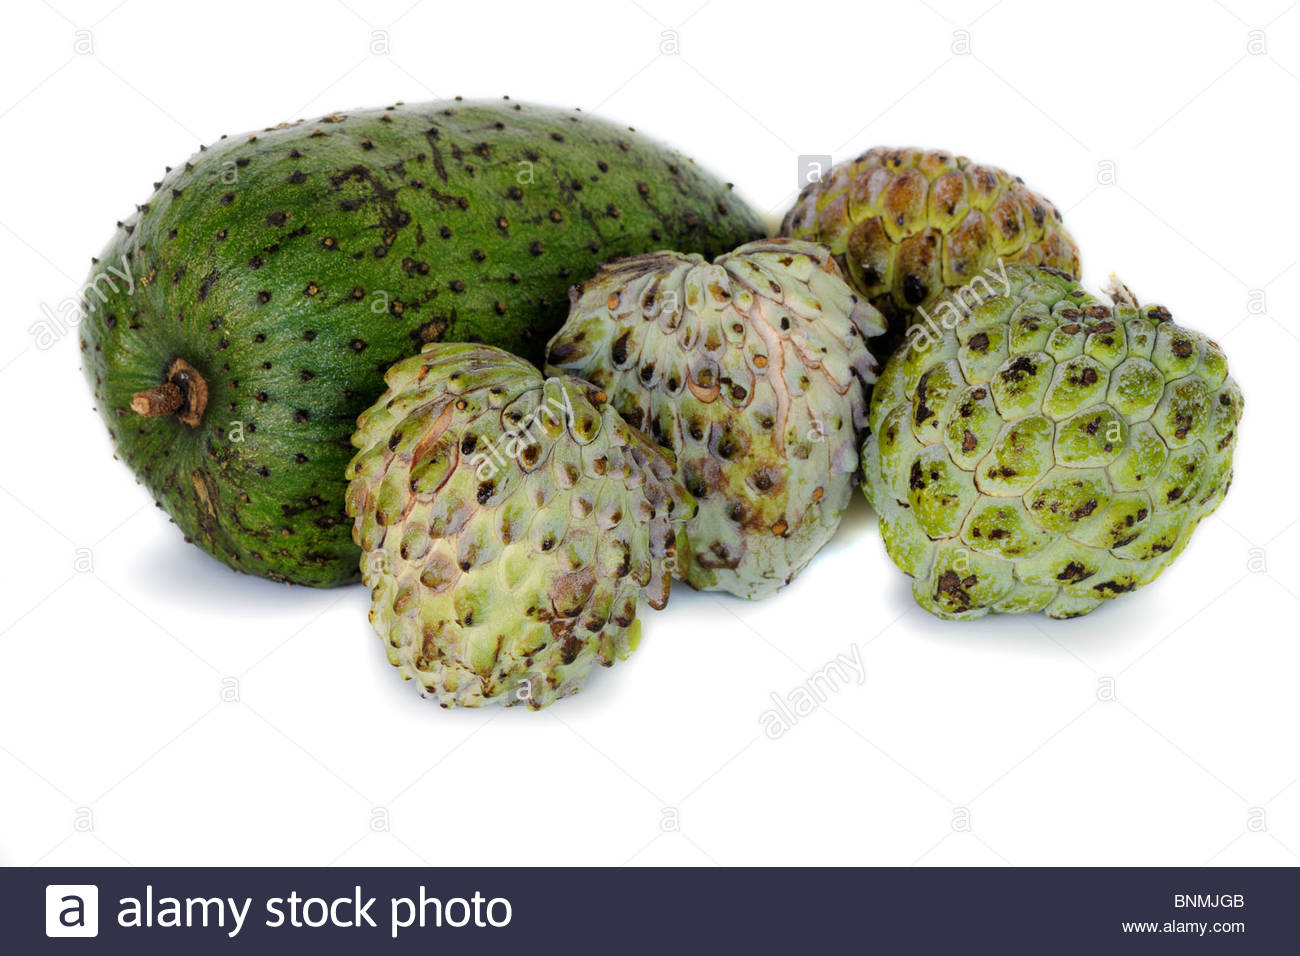 Amazing Sugar Apple Pictures & Backgrounds